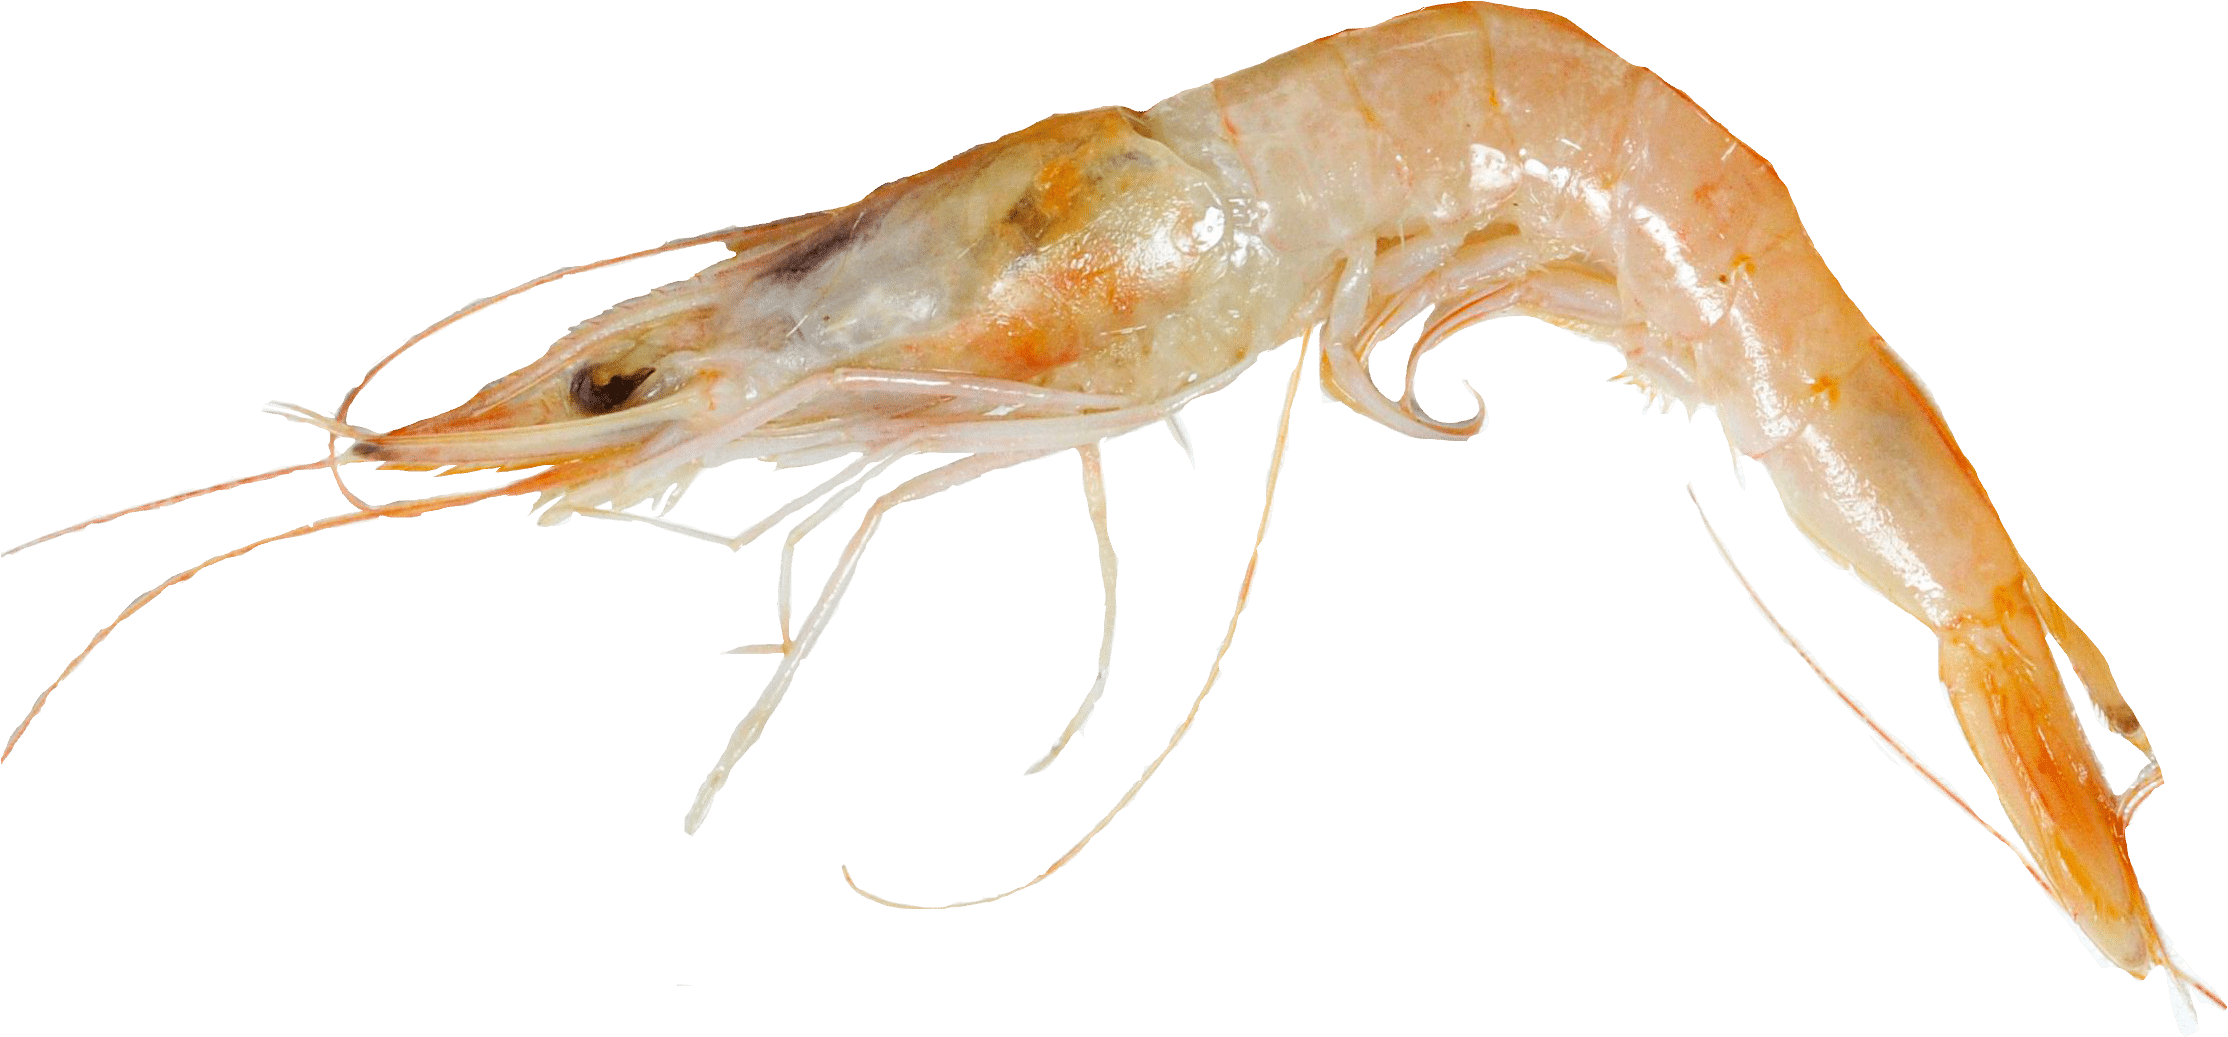 A Shrimp With Long Tails